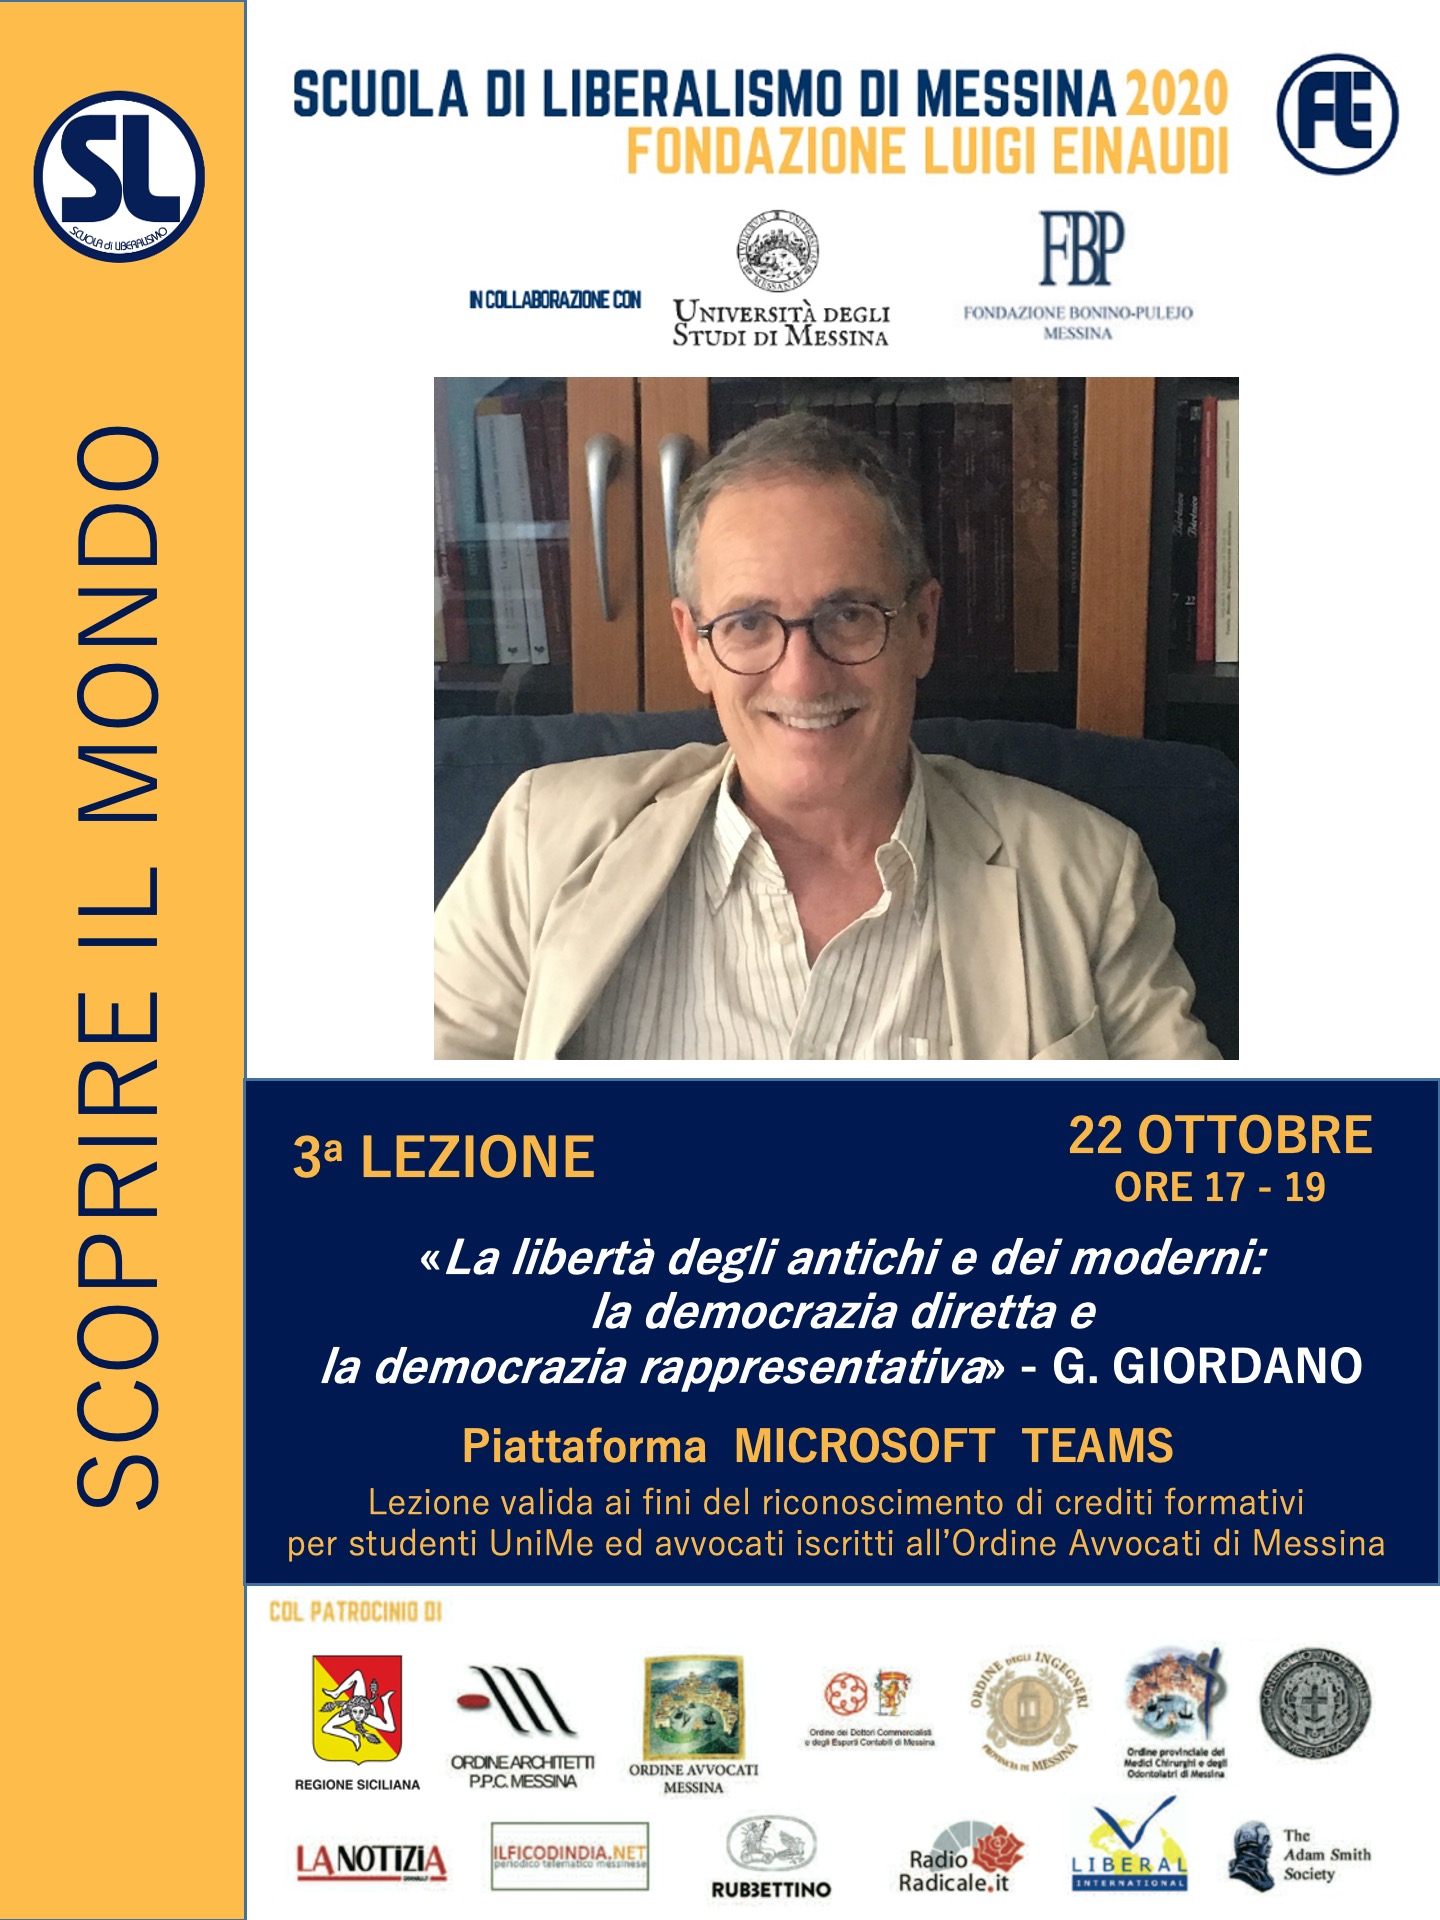 Messina, October 21, 2020. School of Liberalism: Giuseppe Giordano gives the lecture